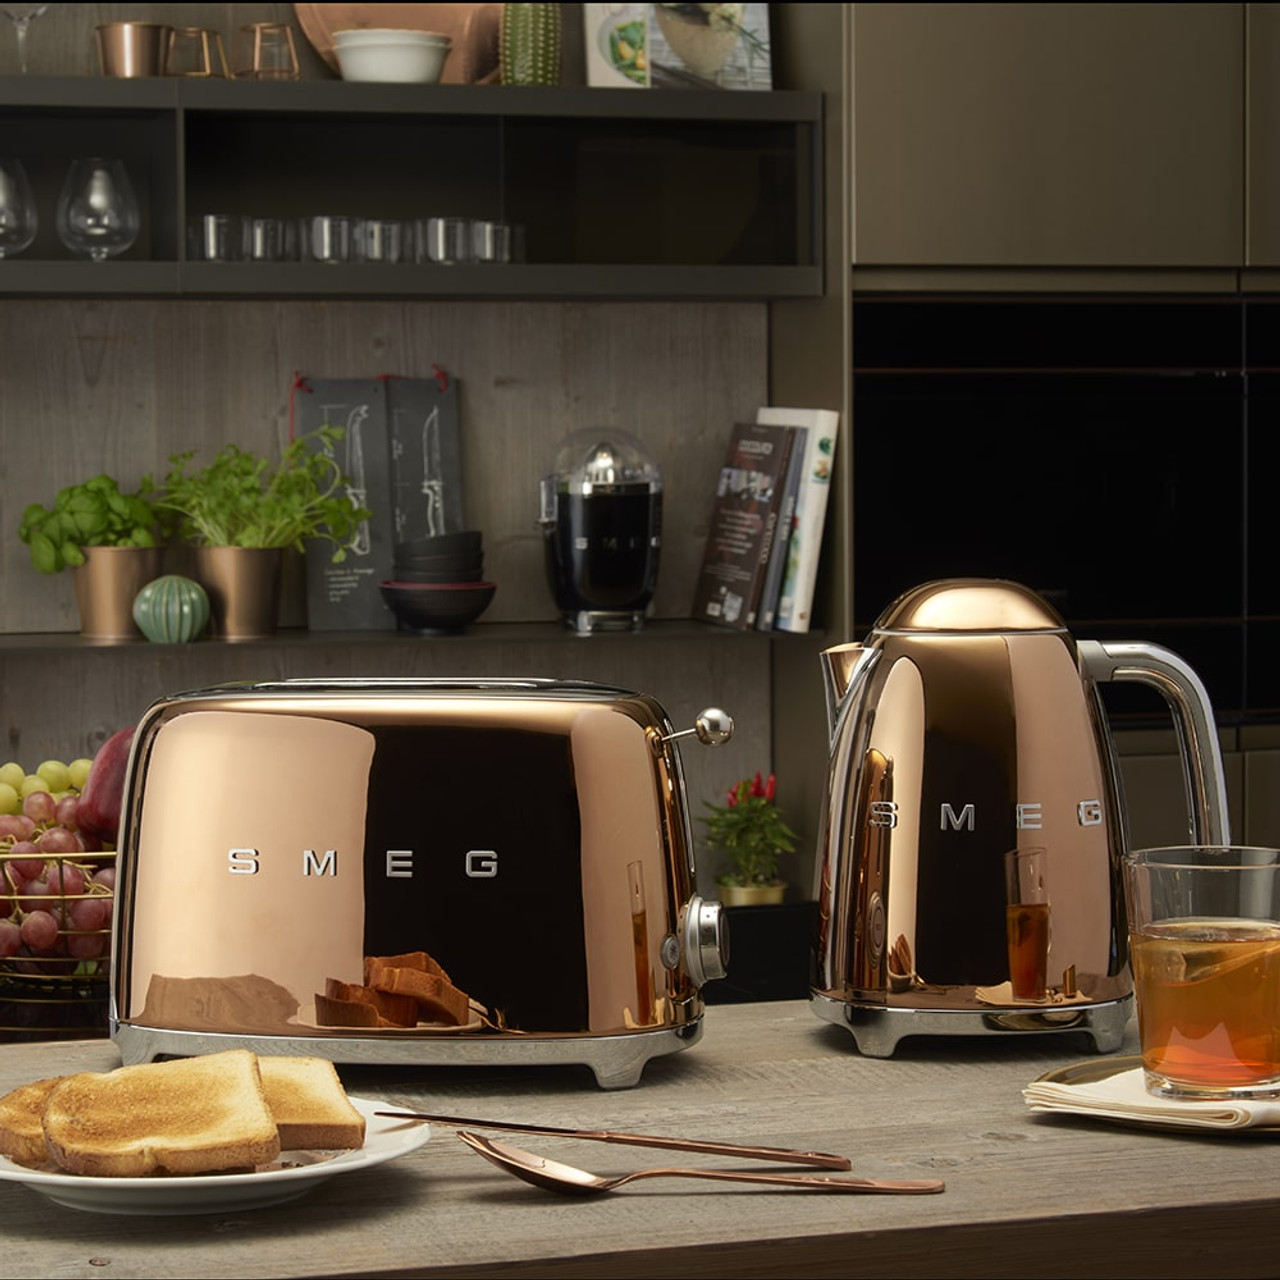 https://cdn11.bigcommerce.com/s-hccytny0od/images/stencil/1280x1280/products/2503/11286/smeg-electric-kettle-rose-gold-1__92042.1633486250.jpg?c=2?imbypass=on